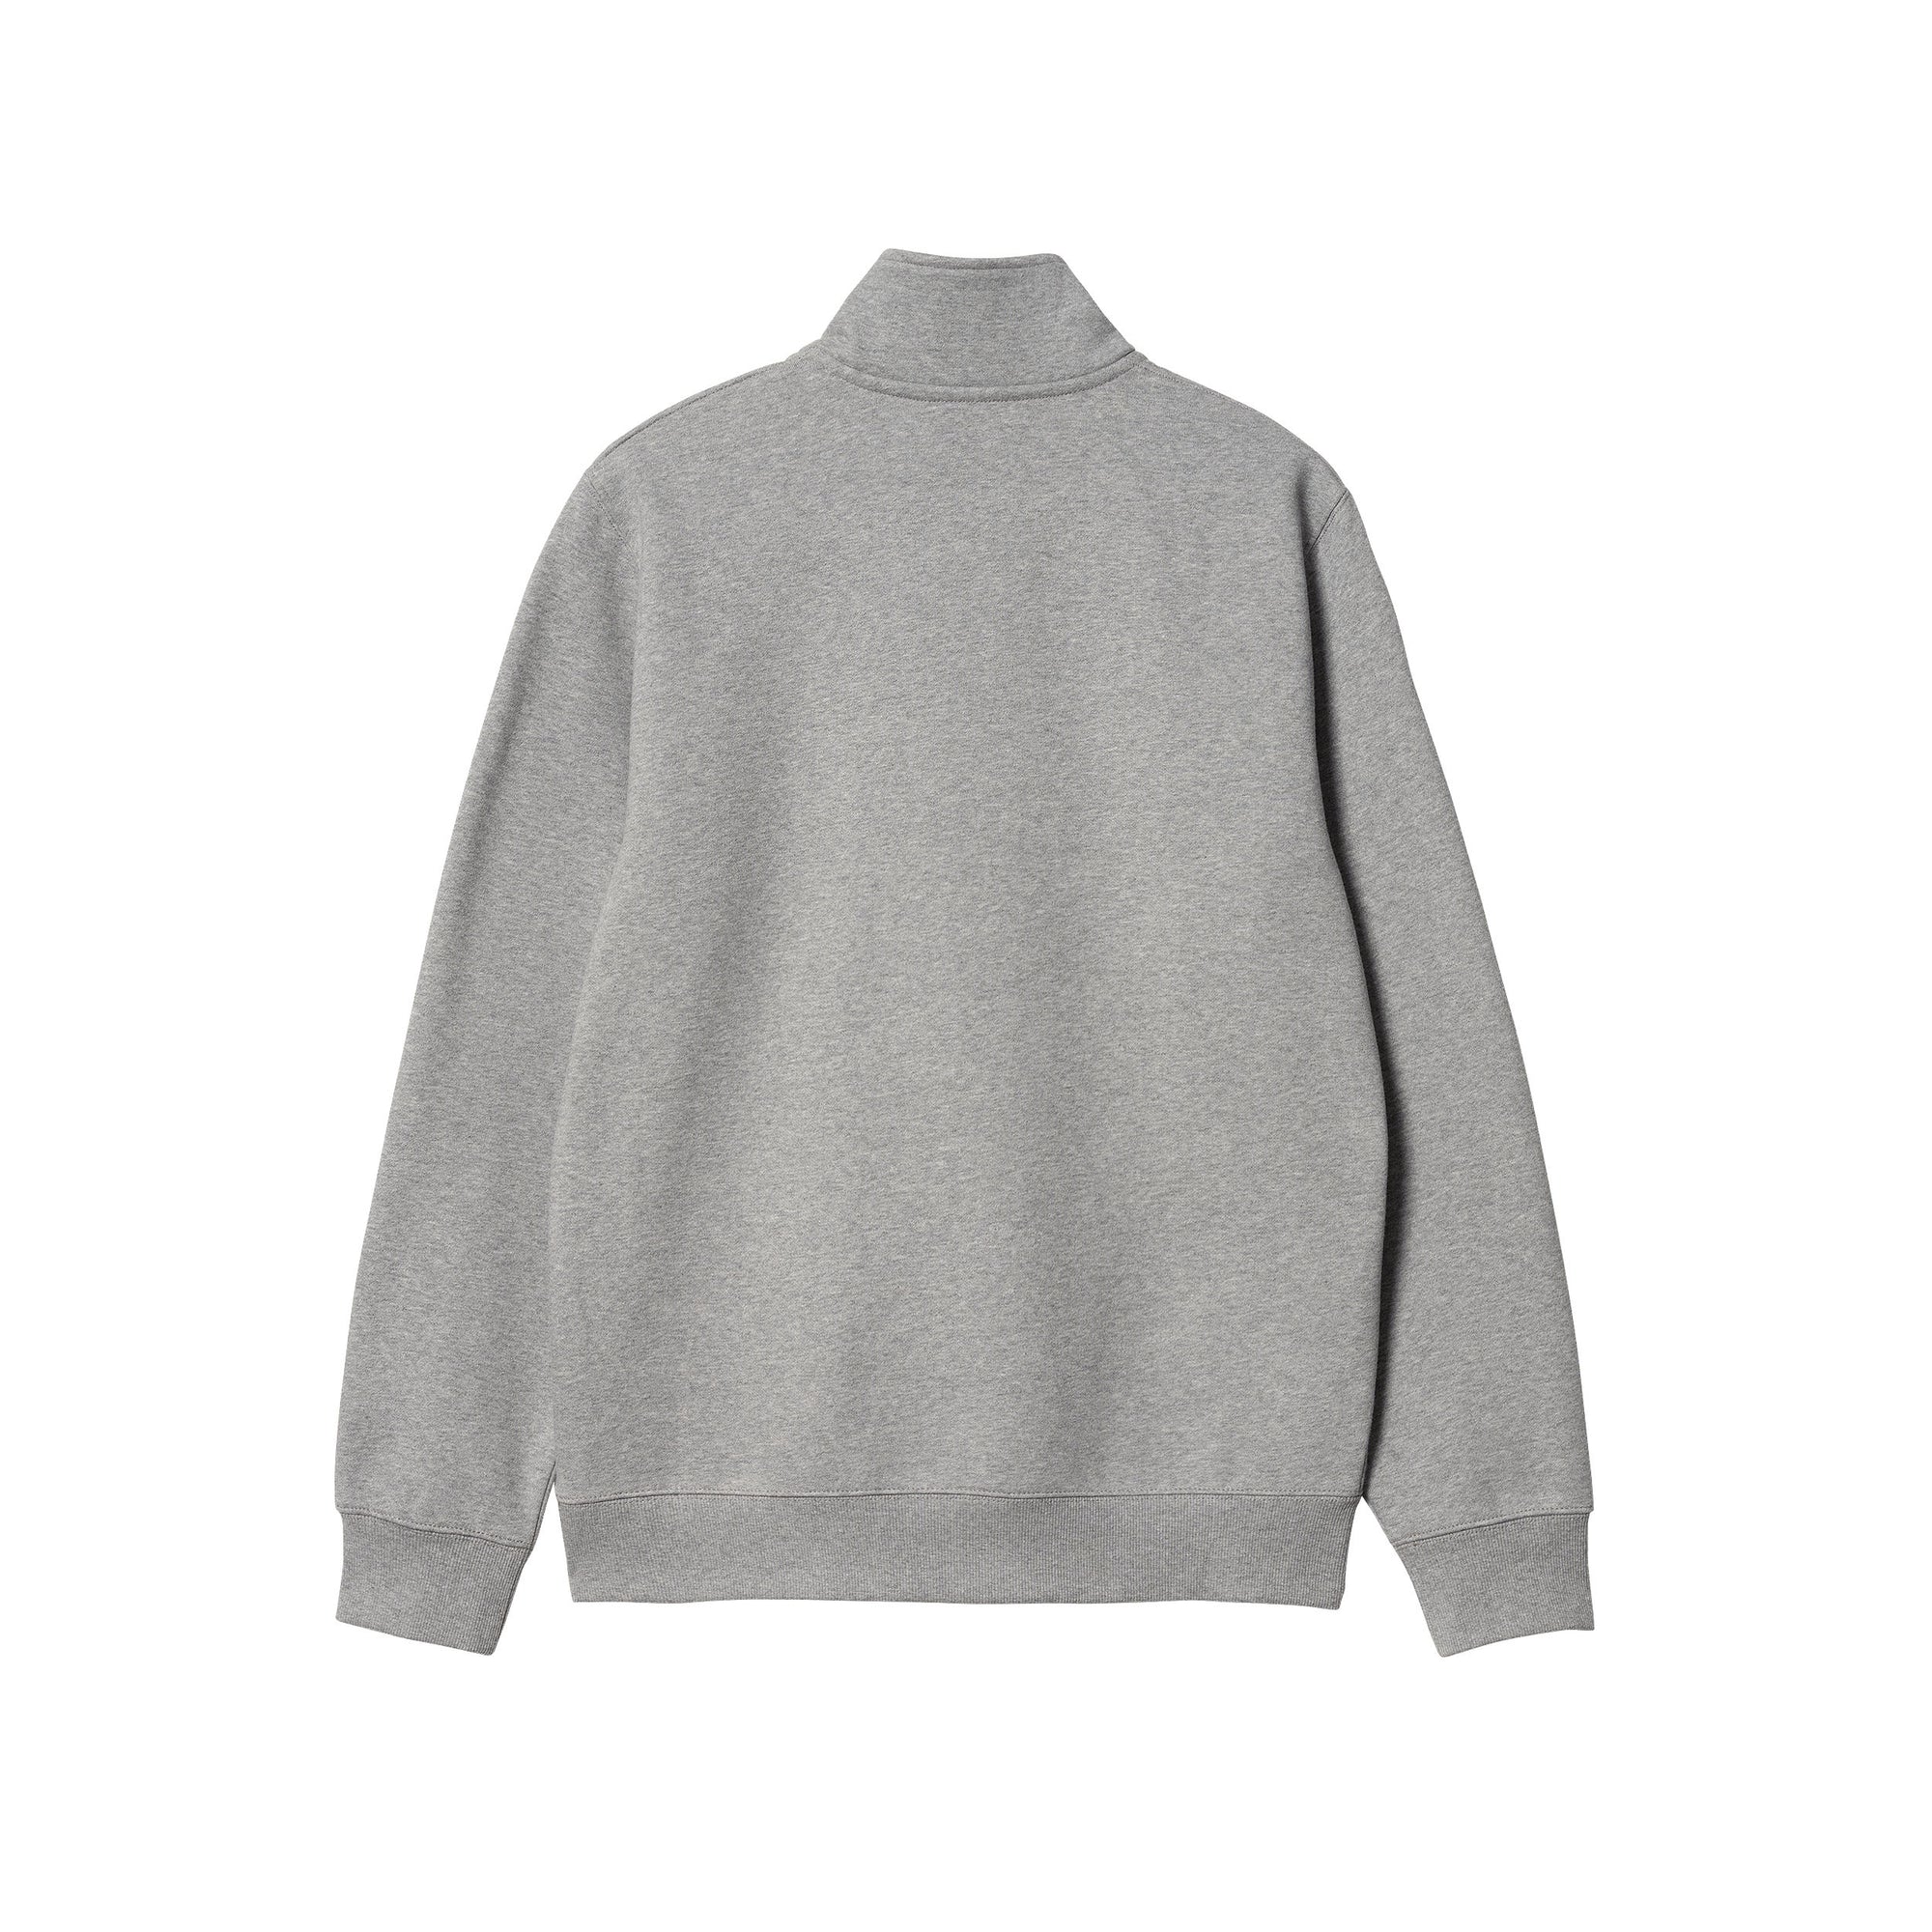 Carhartt WIP Chase Neck Zip Sweat (grey heather/gold) - Blue Mountain Store